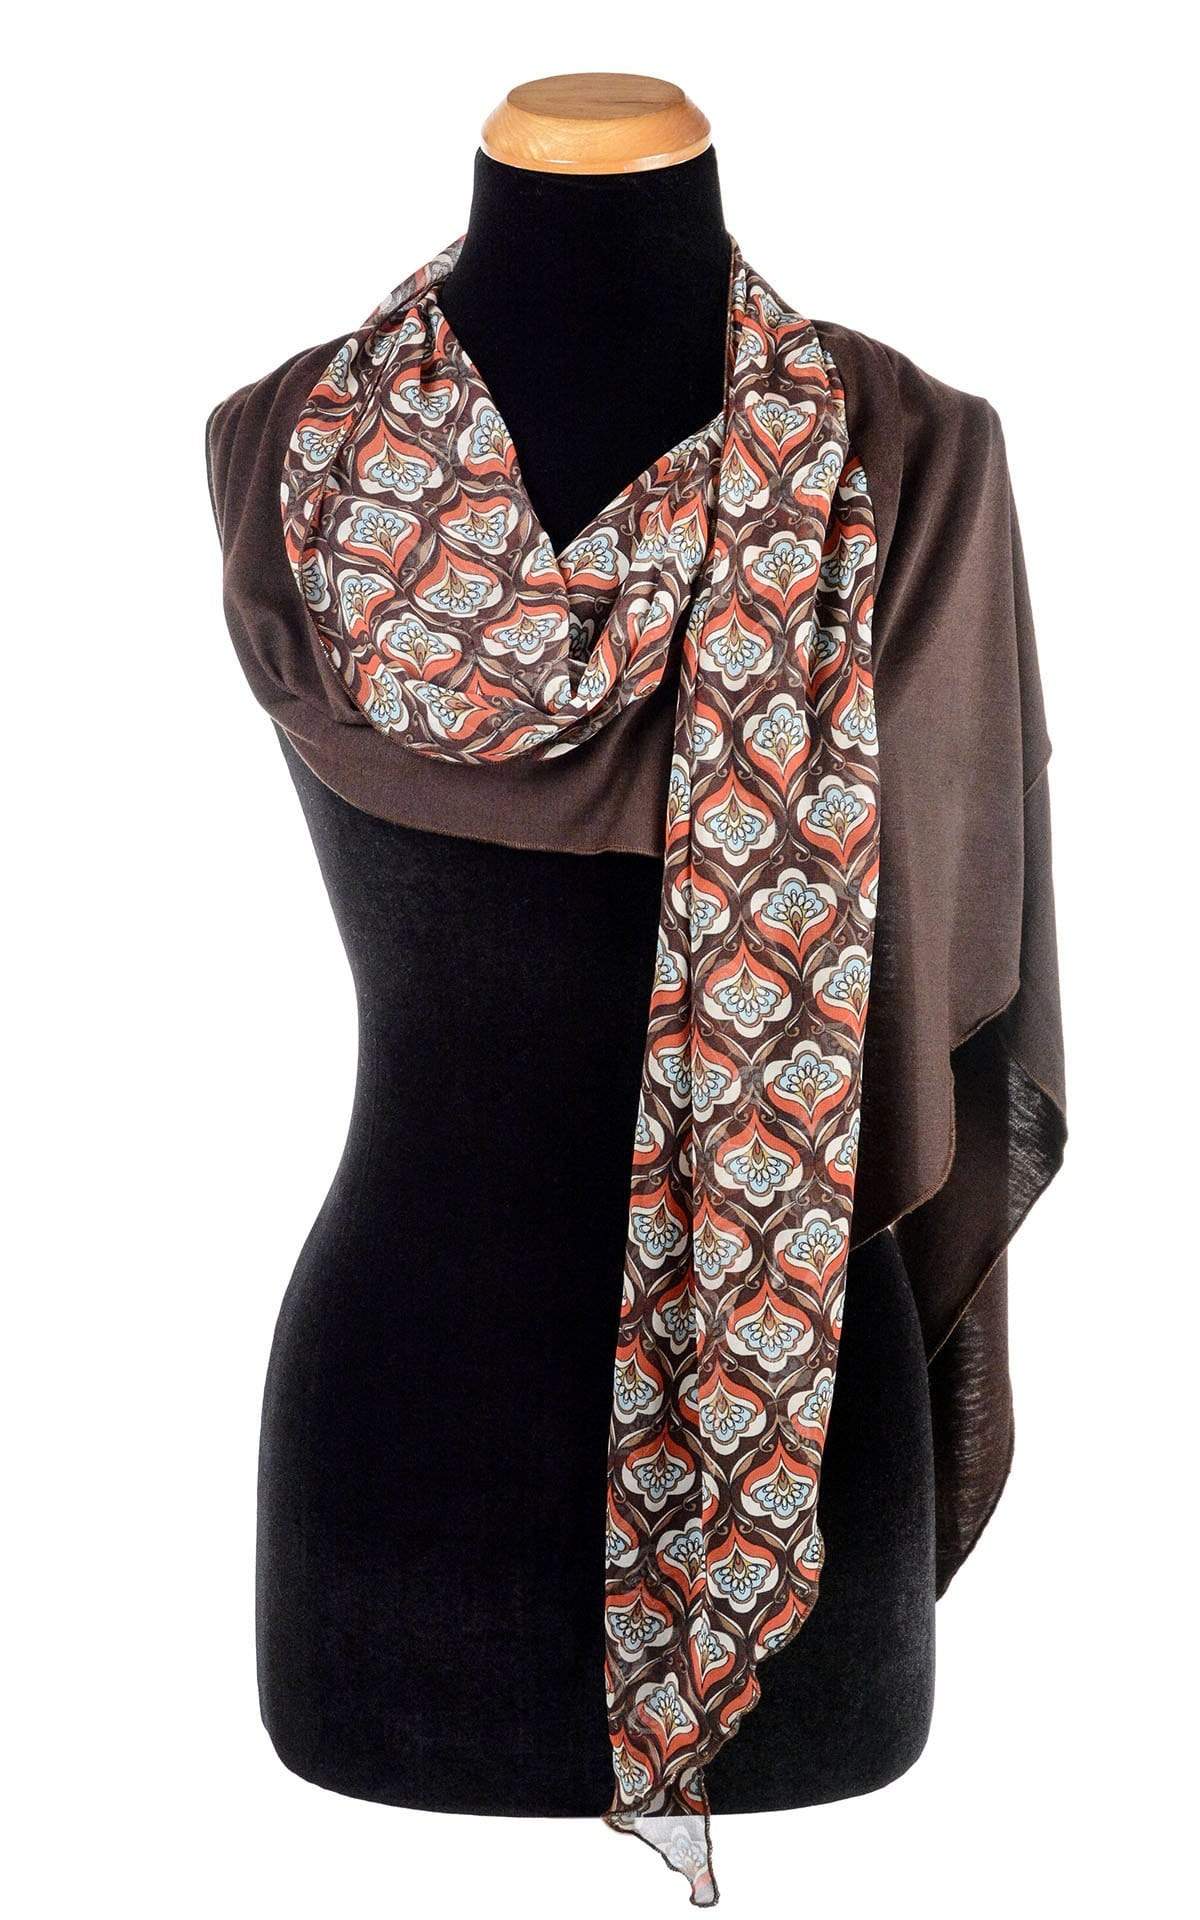  Ladies Two-Tone Handkerchief Scarf, Large Wrap shown over the shoulder | Shown in Multi Mod  (brown, blue, rust and cream)   print on Chiffon with Chocolate Jersey Knit | Handmade in Seattle WA | Pandemonium Millinery